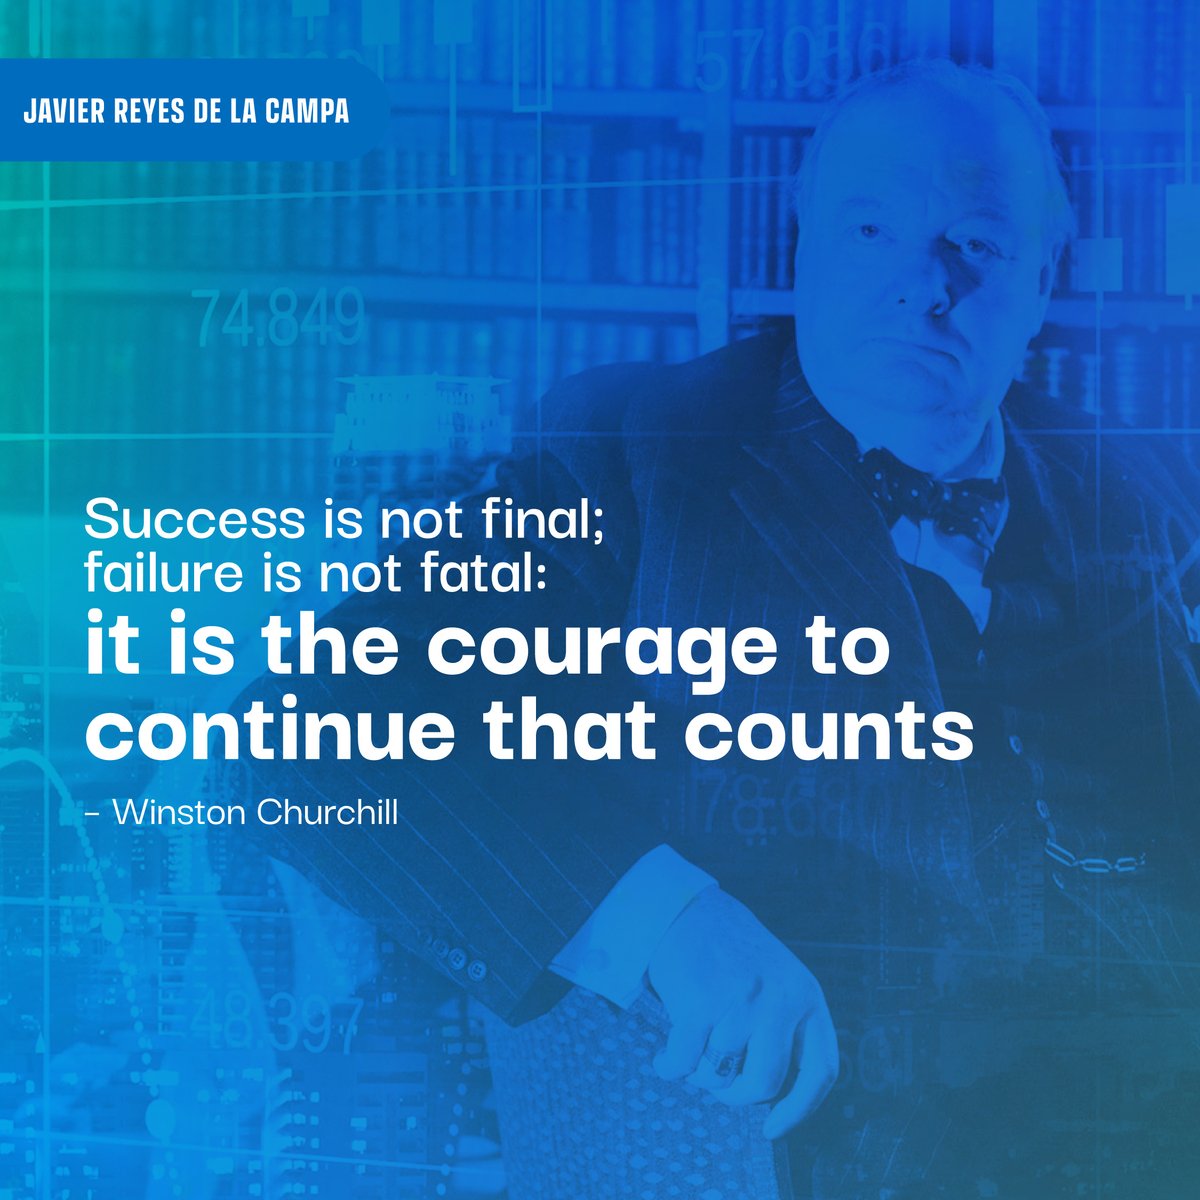 Words can drive your determination and success.
#WeeklyInspiration

#WinstonChurchill